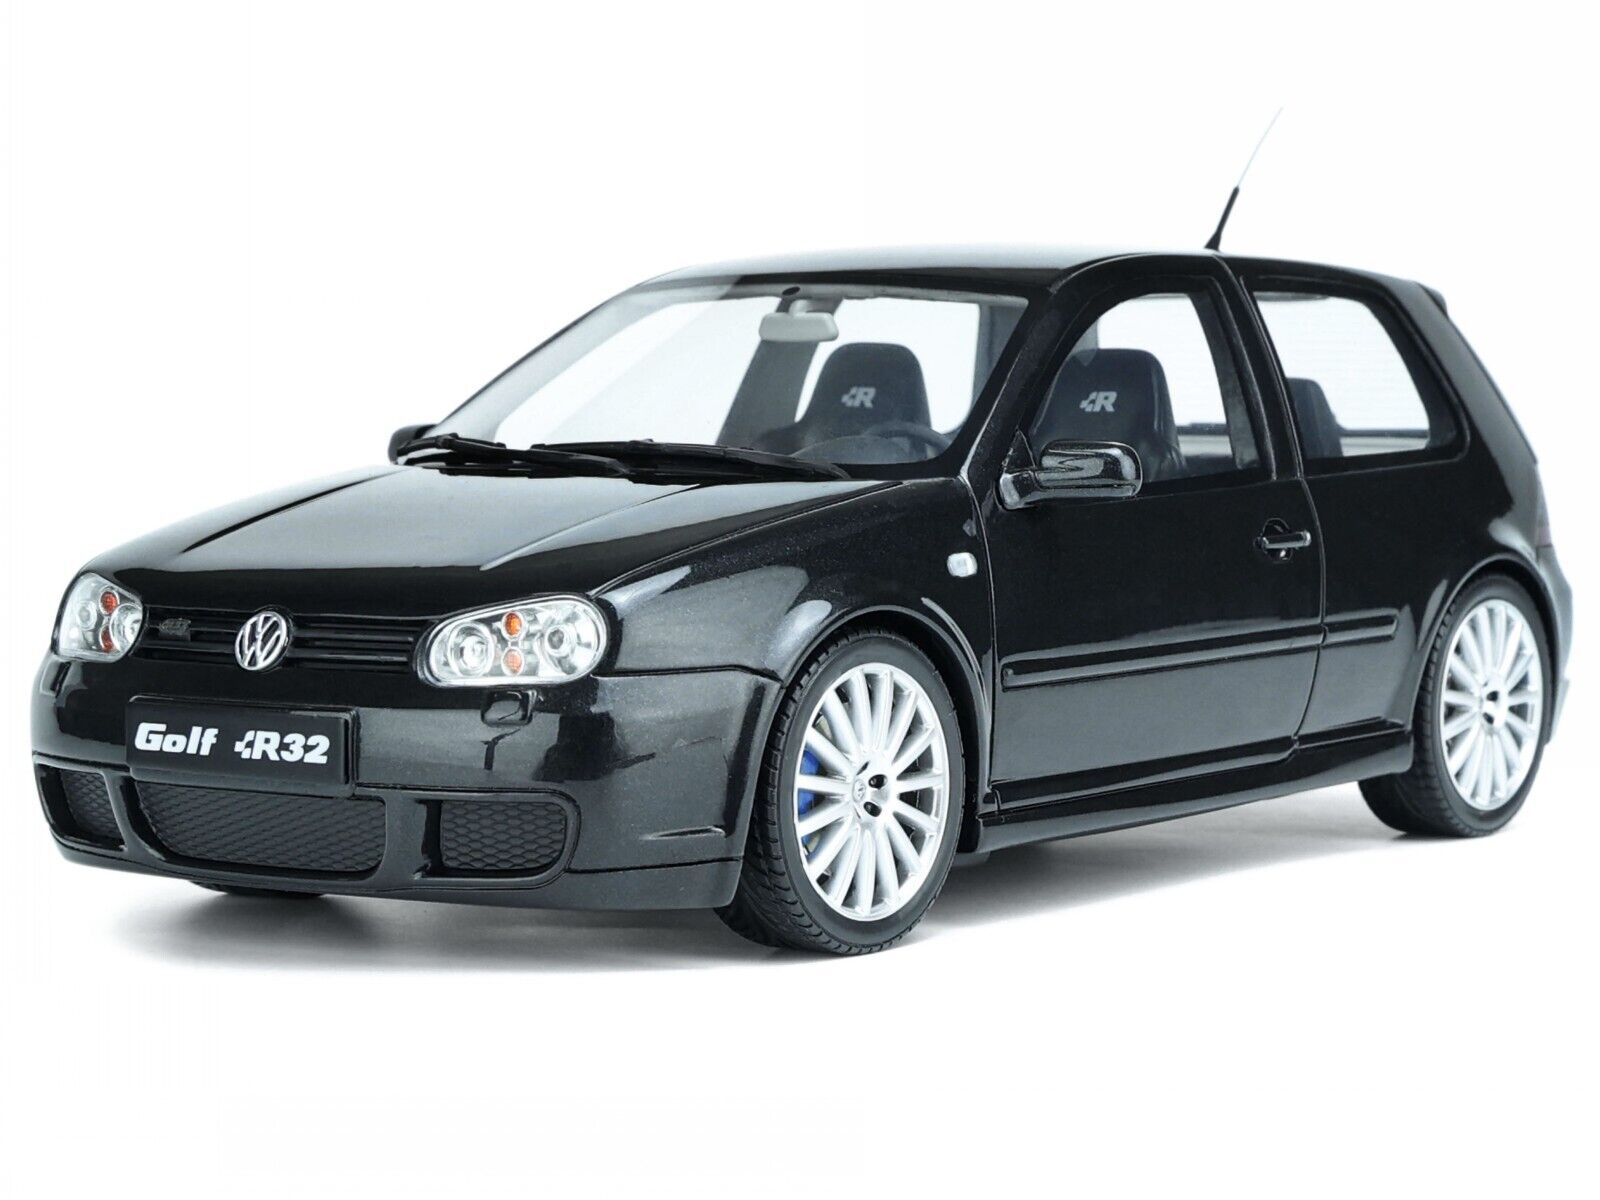 2003 Volkswagen Golf IV R32 Black Magic Nacre Limited Edition to 3000 Pieces Worldwide 1/18 Model Car by Otto Mobile